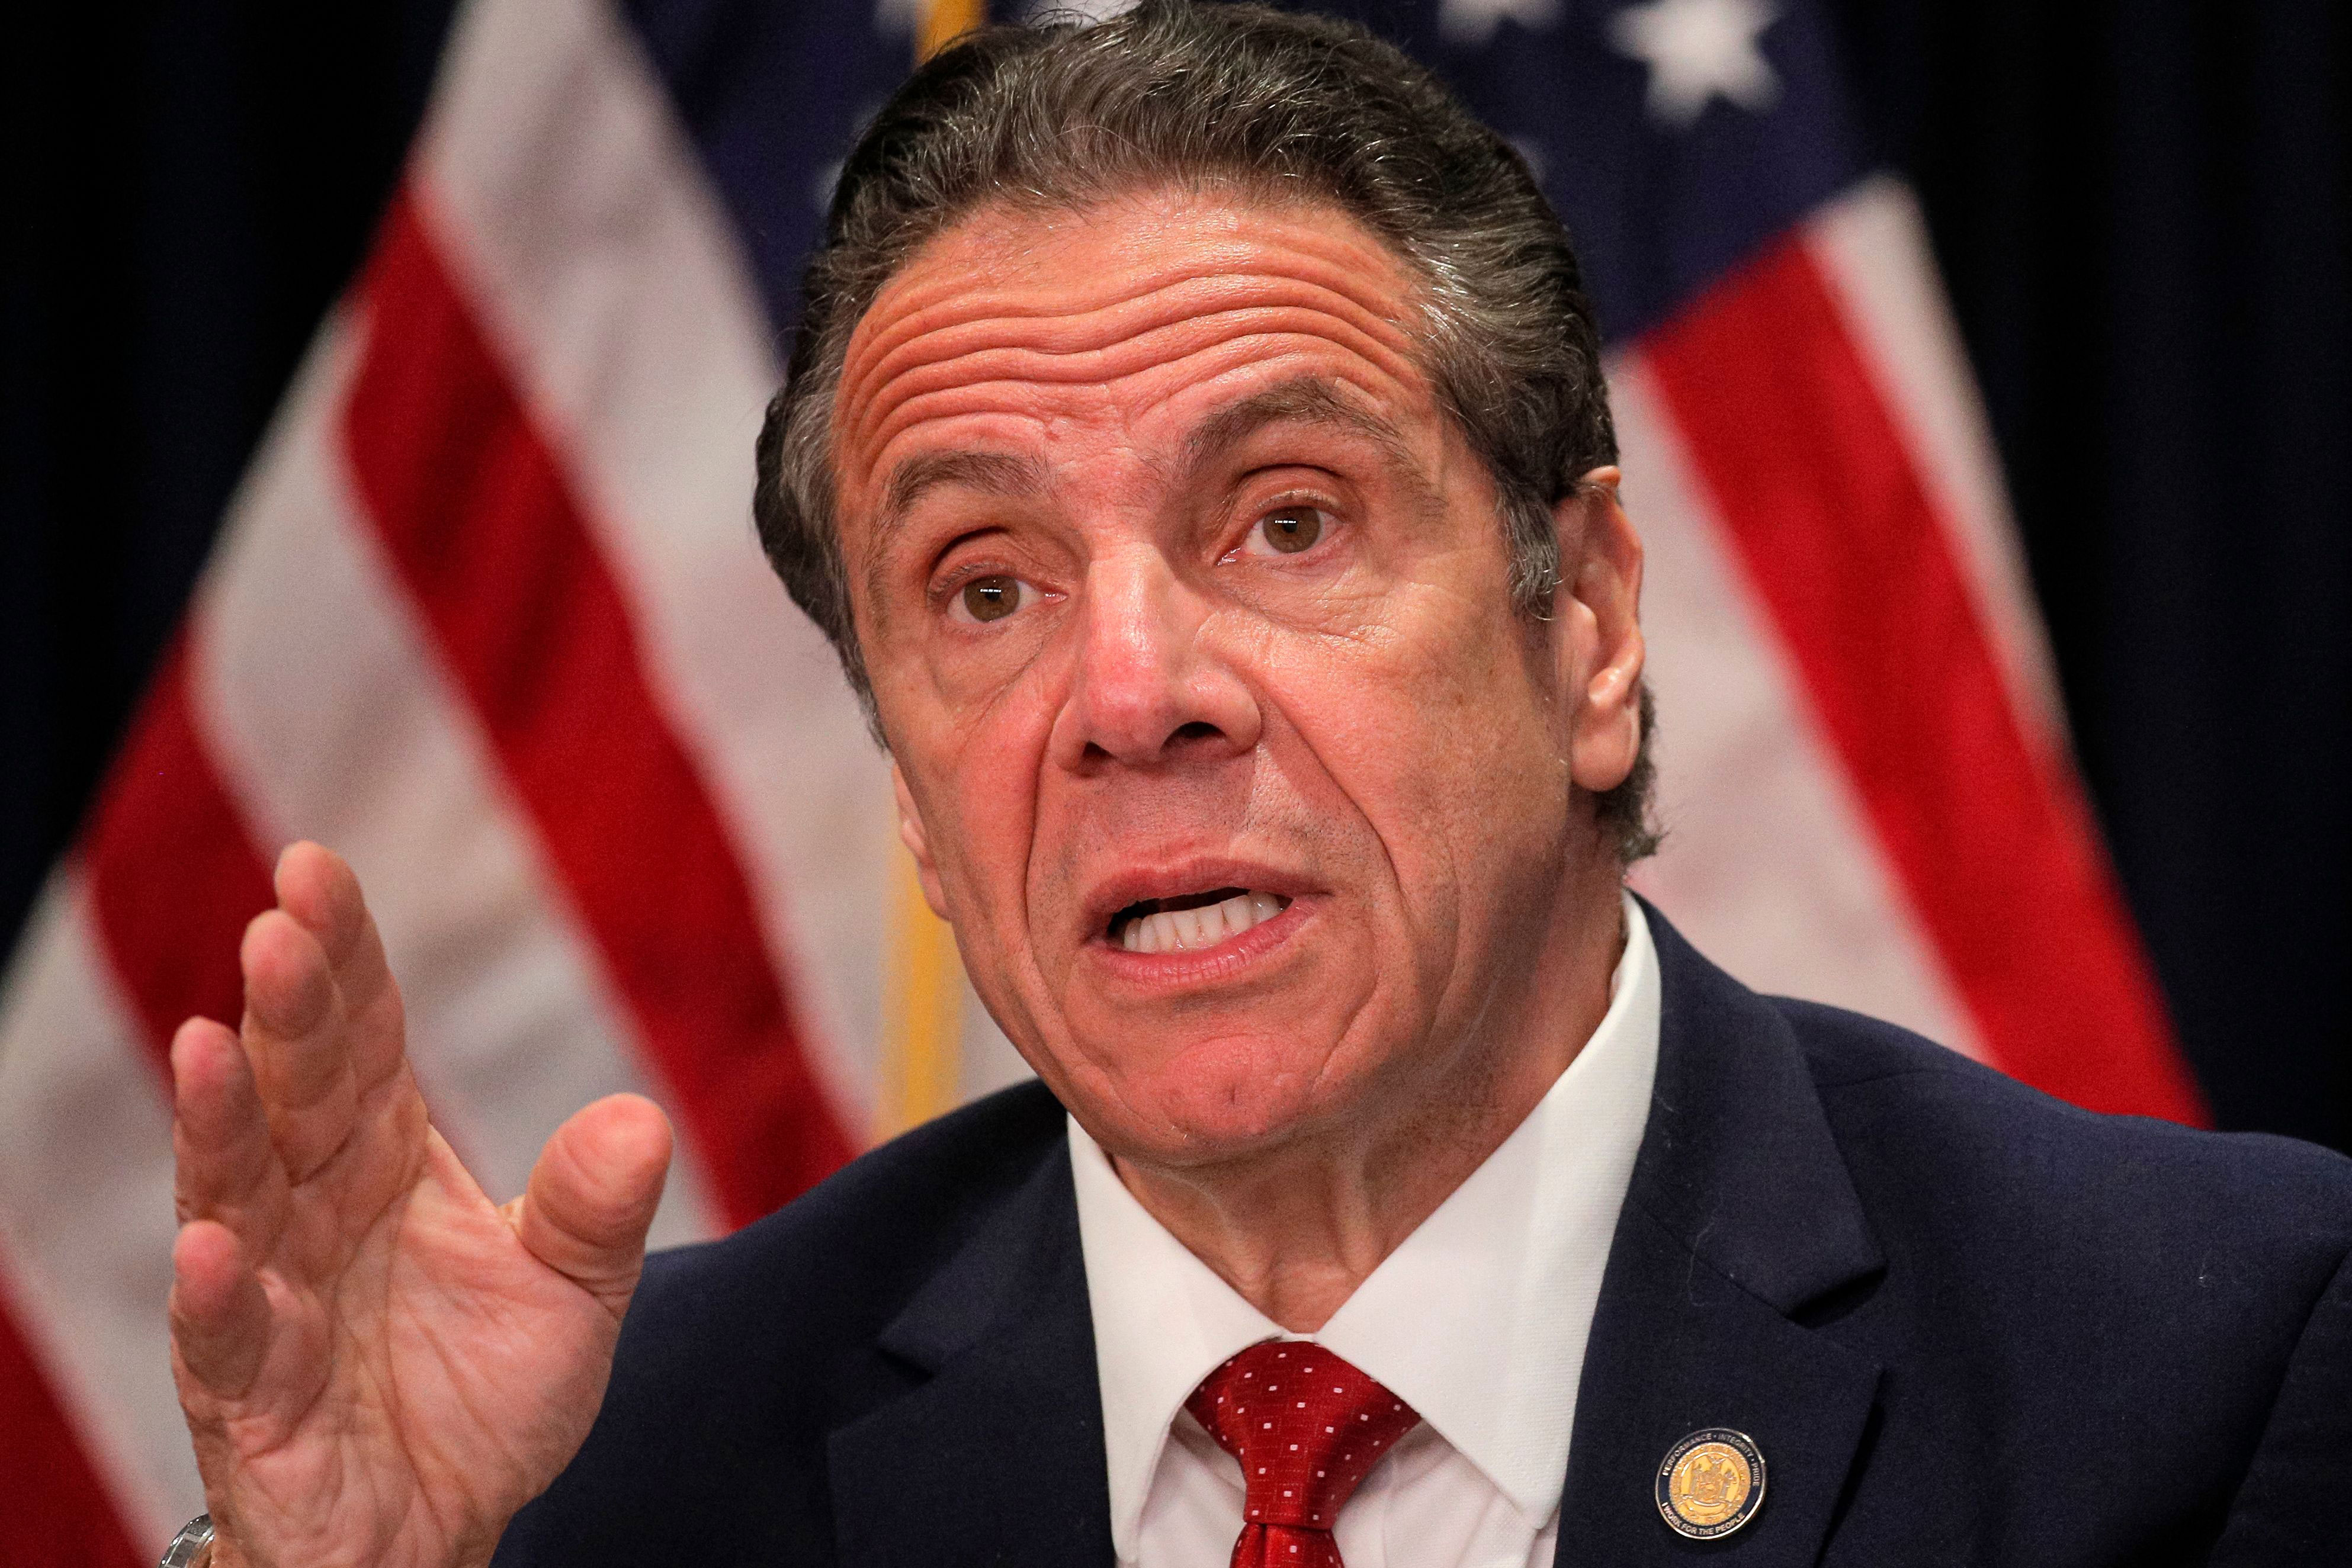 Gov. Andrew Cuomo speaks during a news conference in New York on March 24.